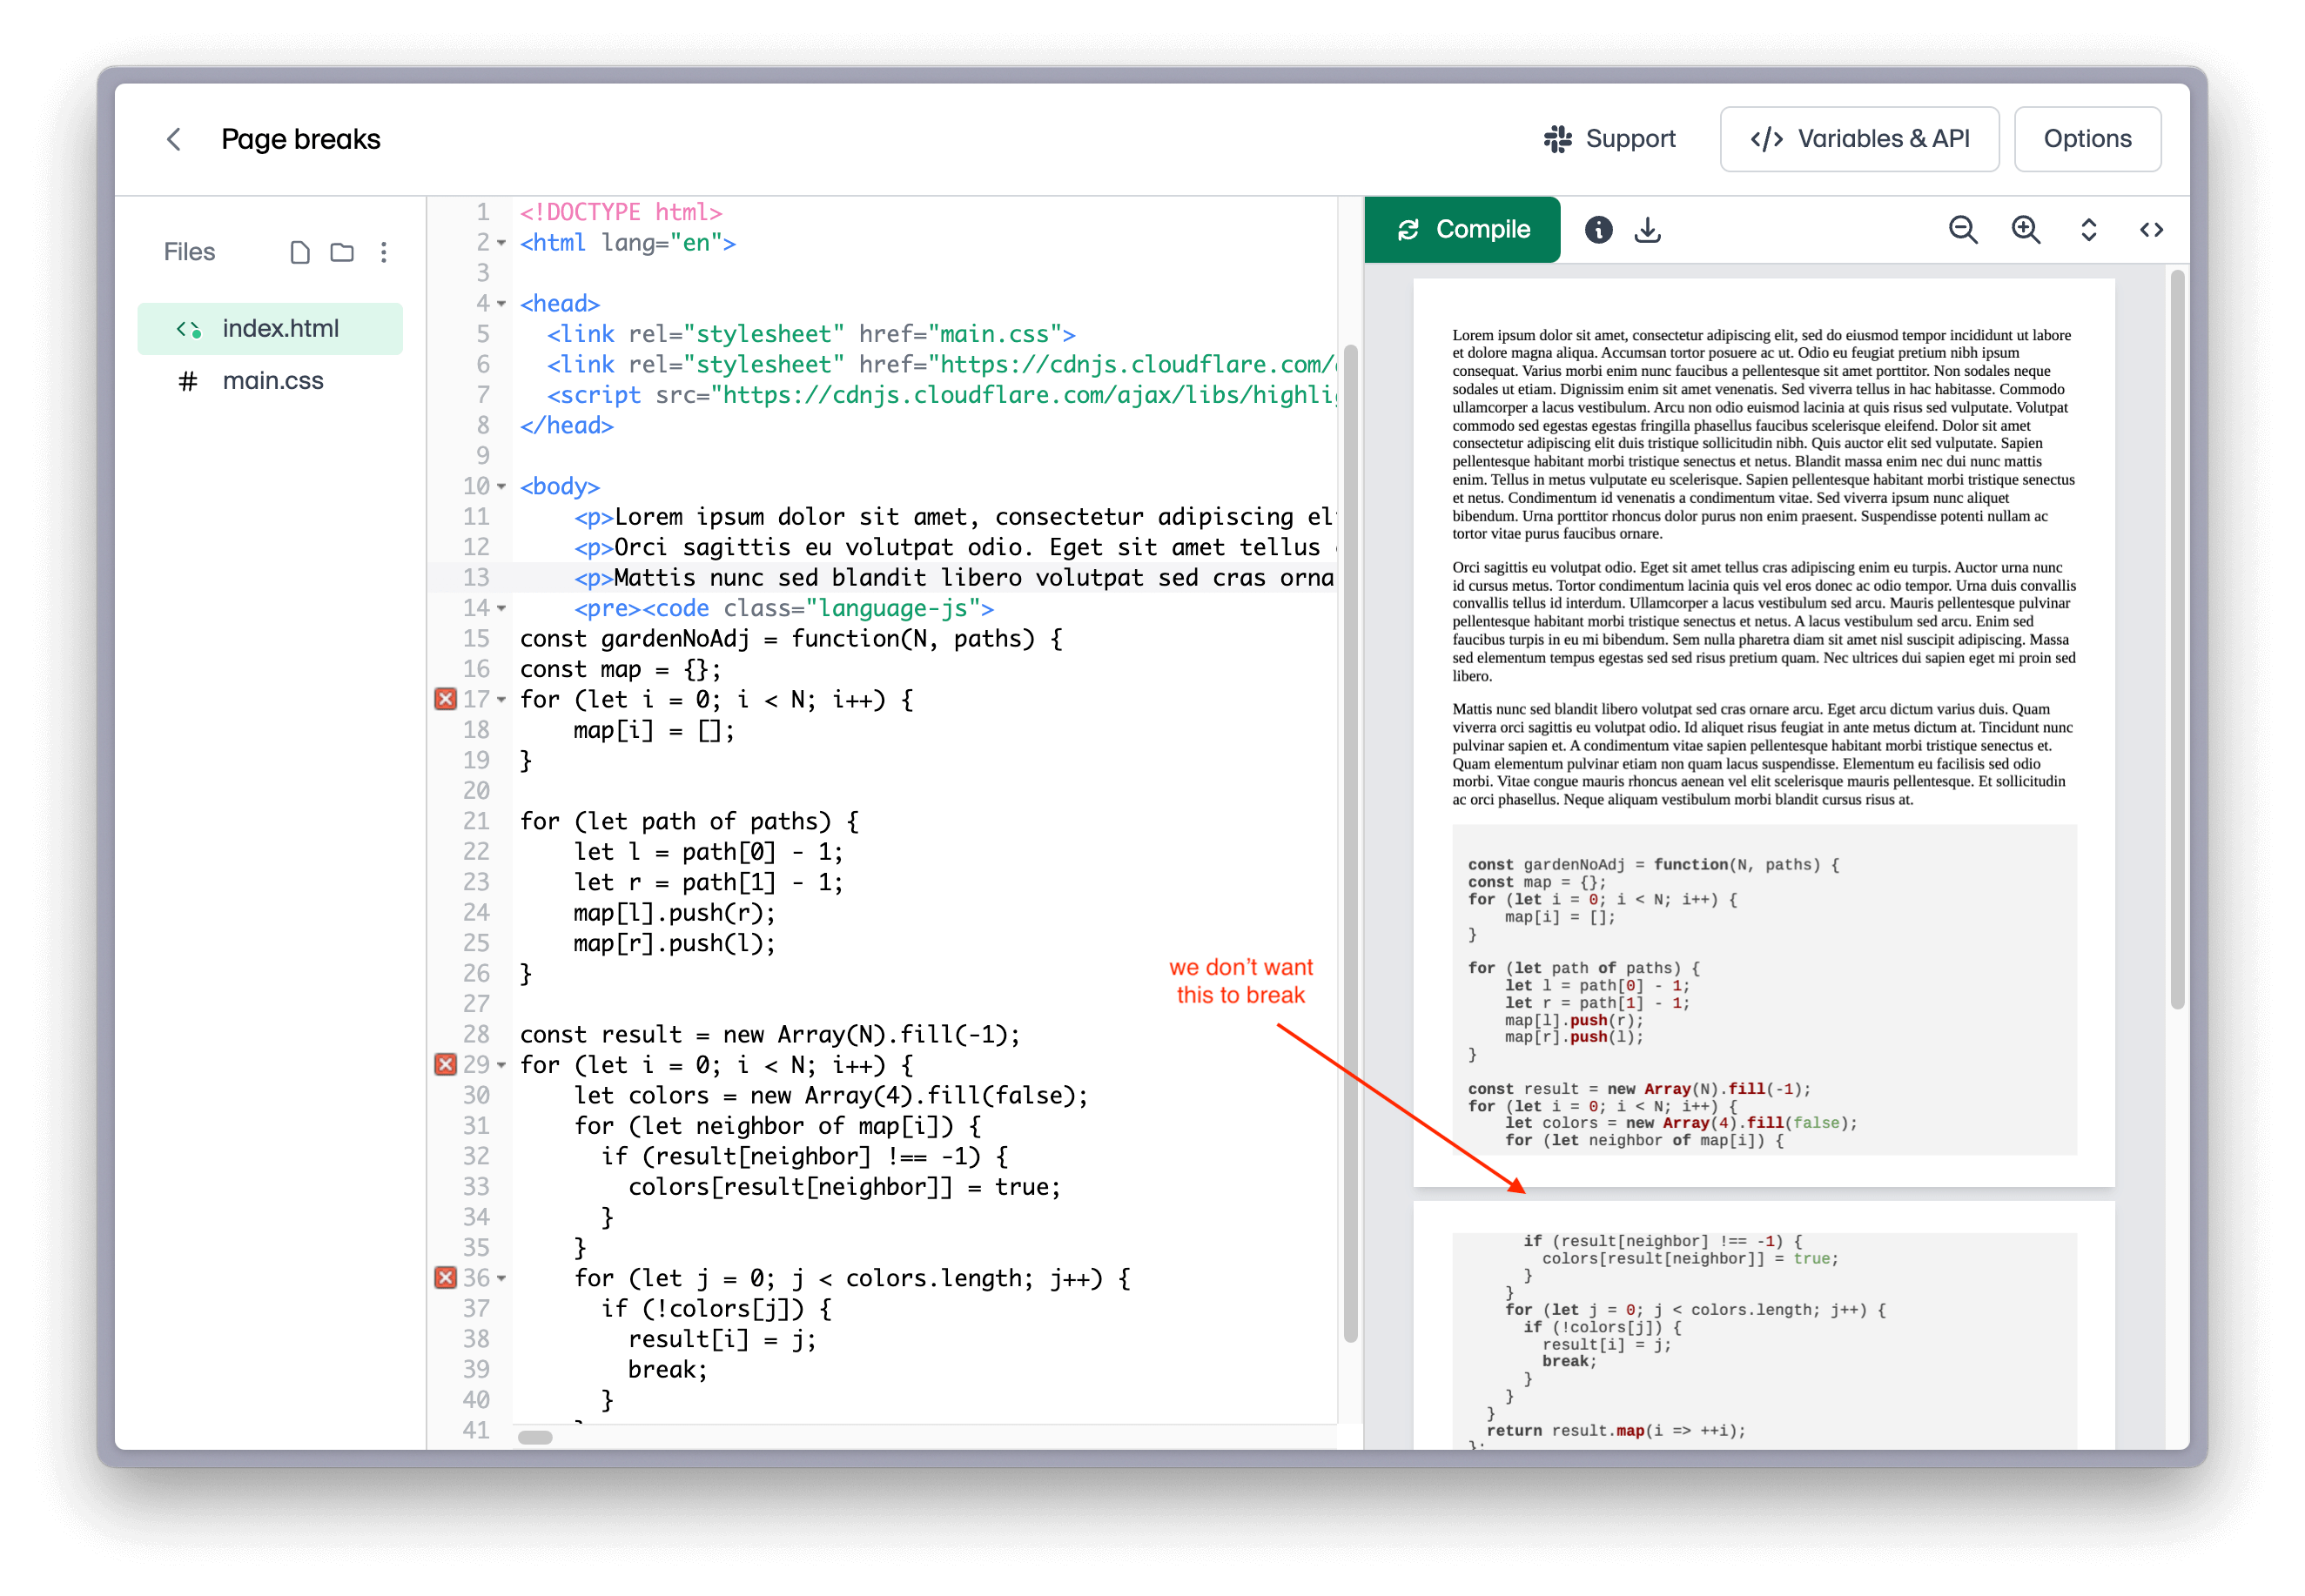 A code block being cut in half due to a page break